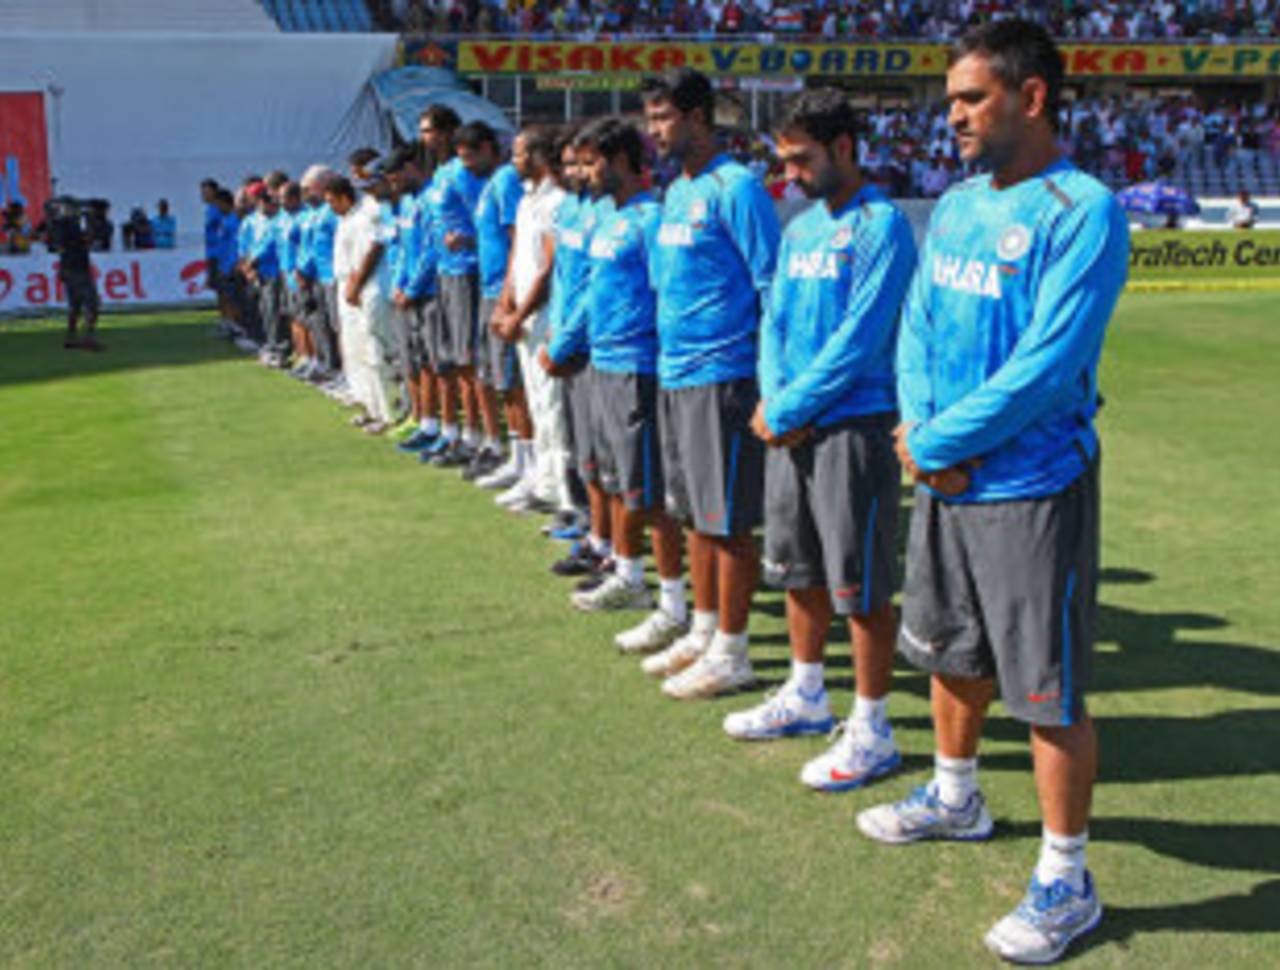 India observes a minute's silence for the victims of the Hyderabad blasts, India v Australia, 2nd Test, Hyderabad, 2nd day, March 3, 2013